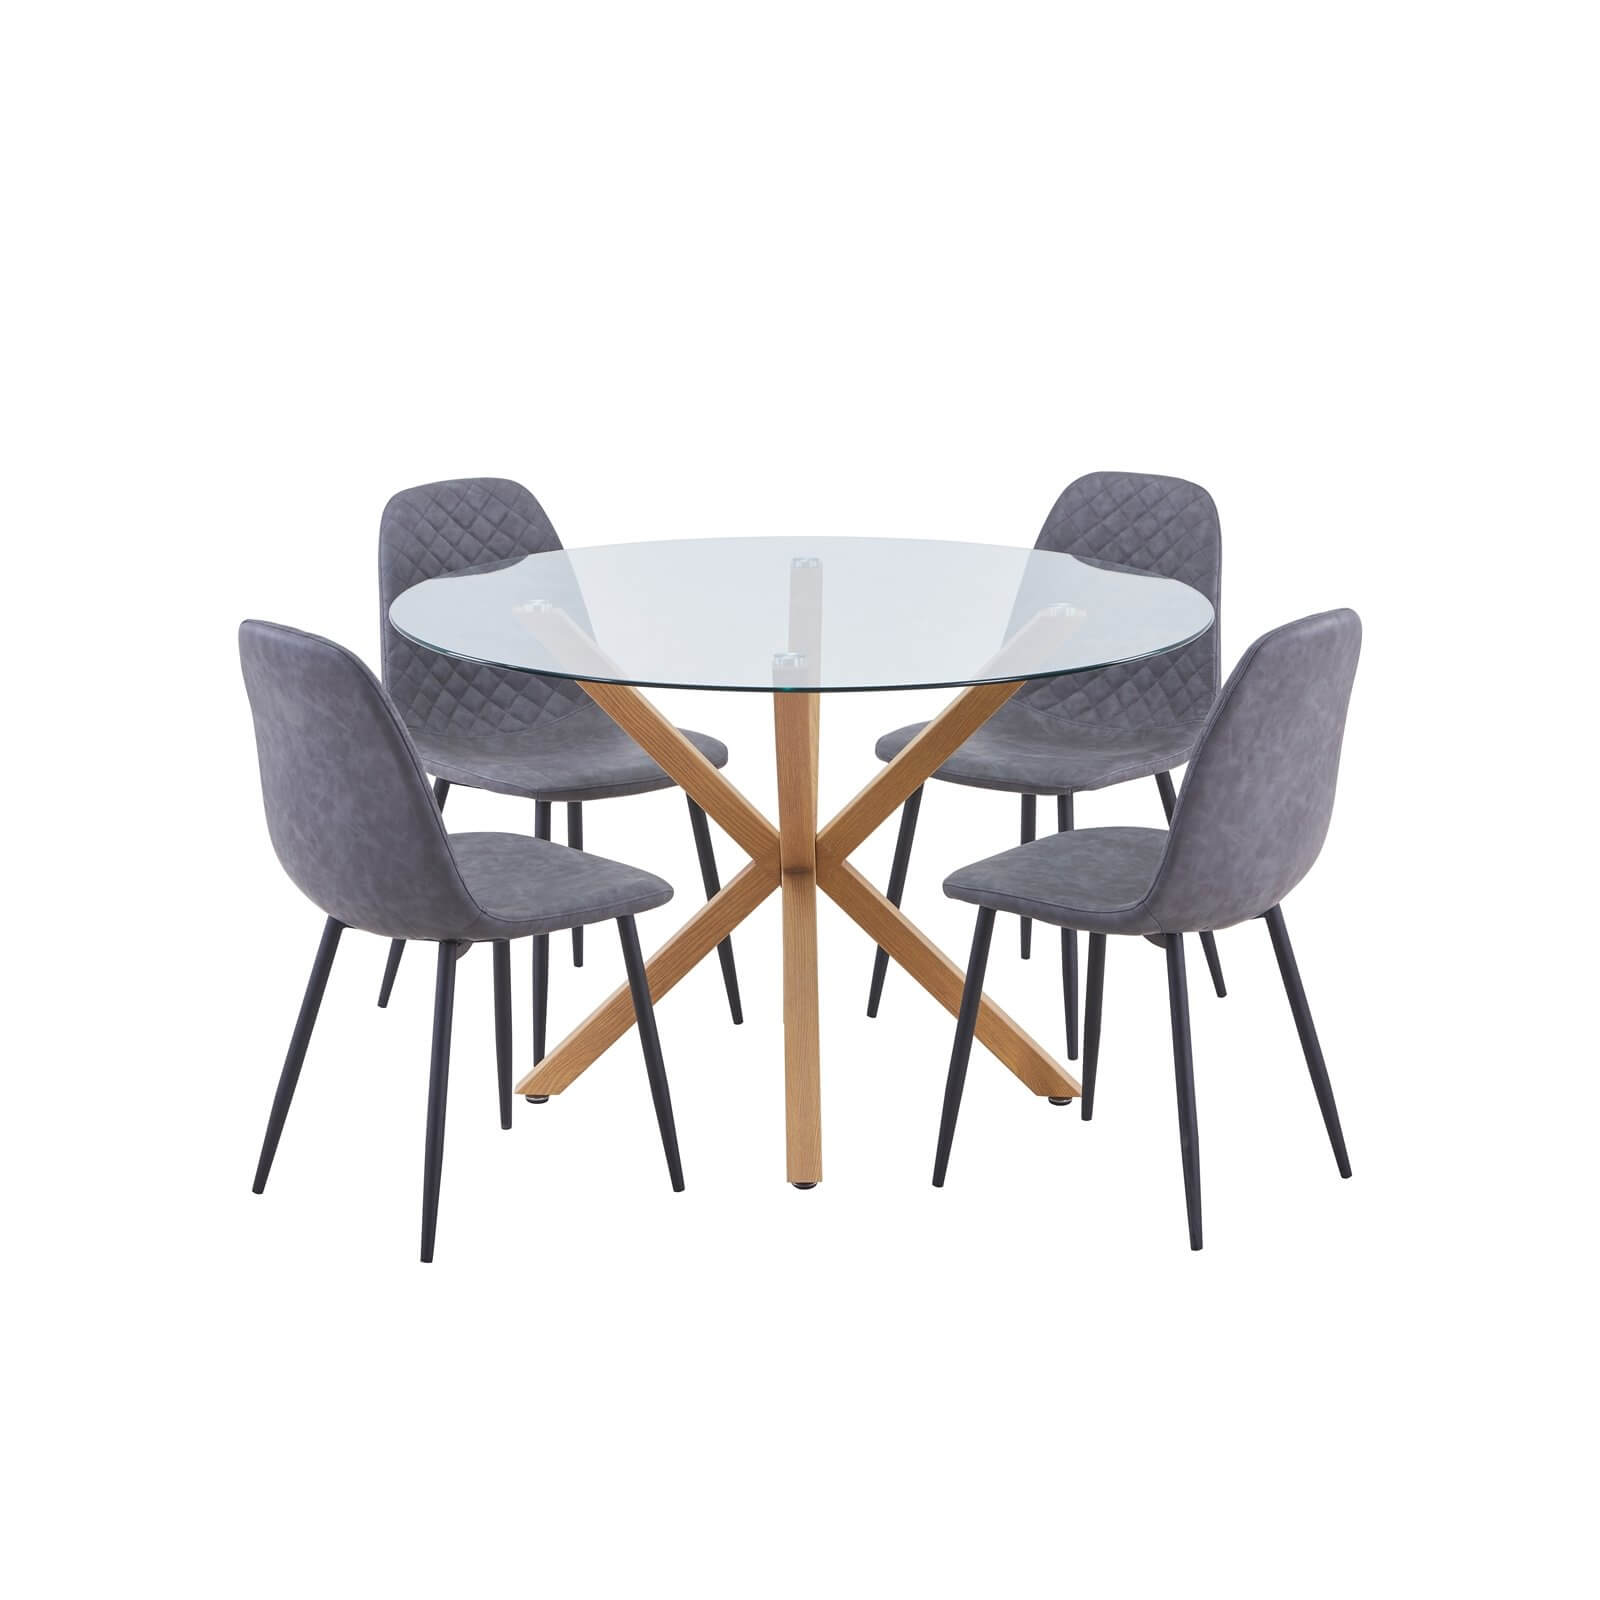 Ludlow Round Dining Table and 4 Perth Chairs - Grey